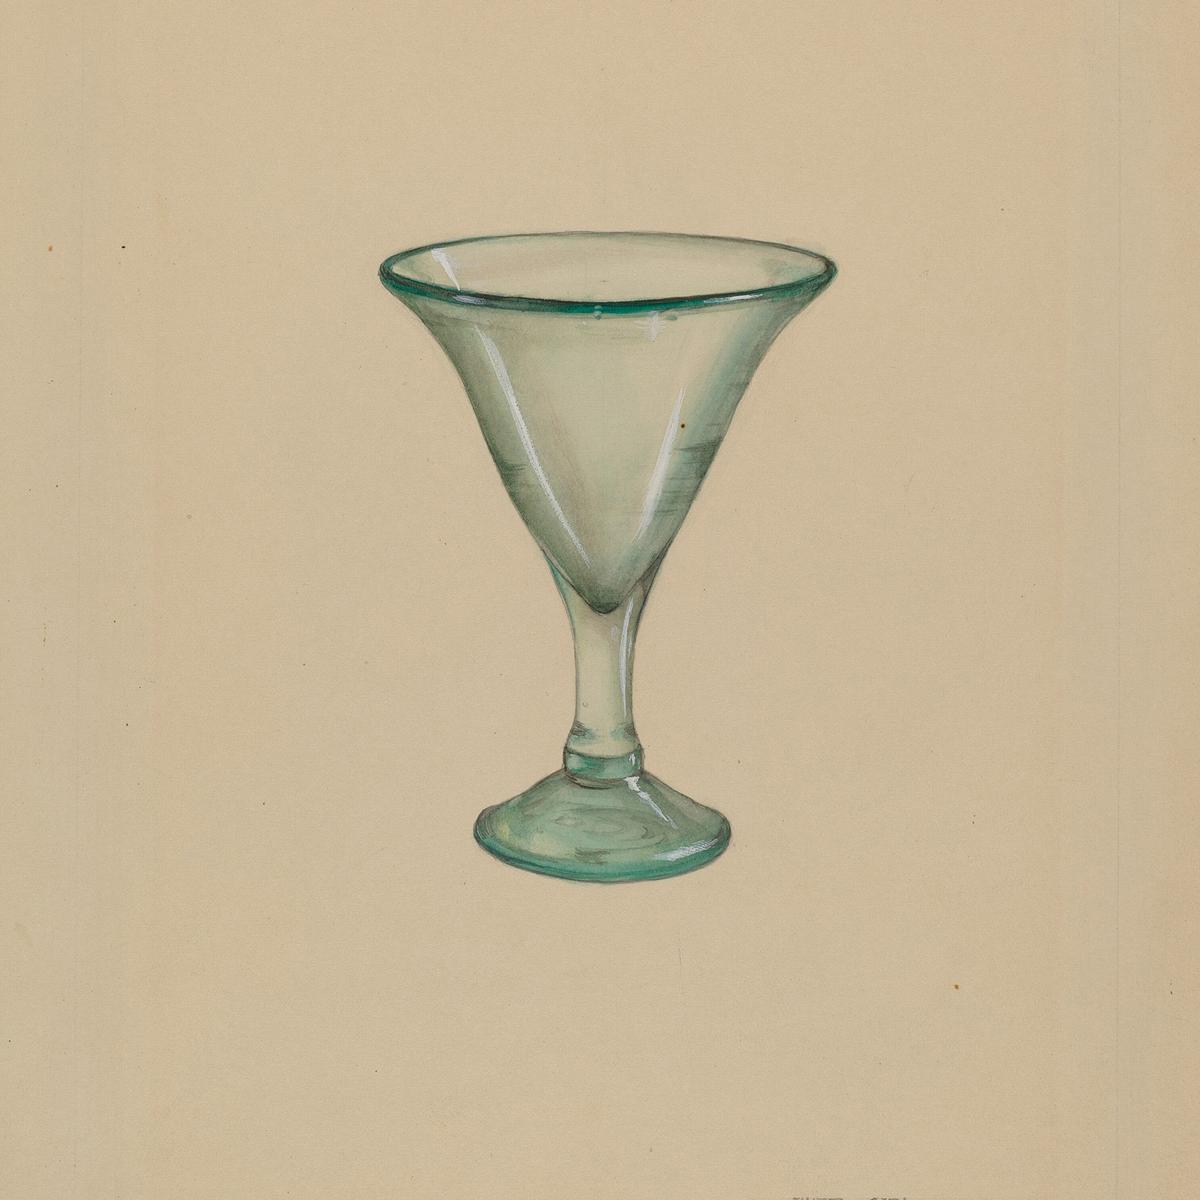 a watercolour of a lopsided wine glass on a plain background